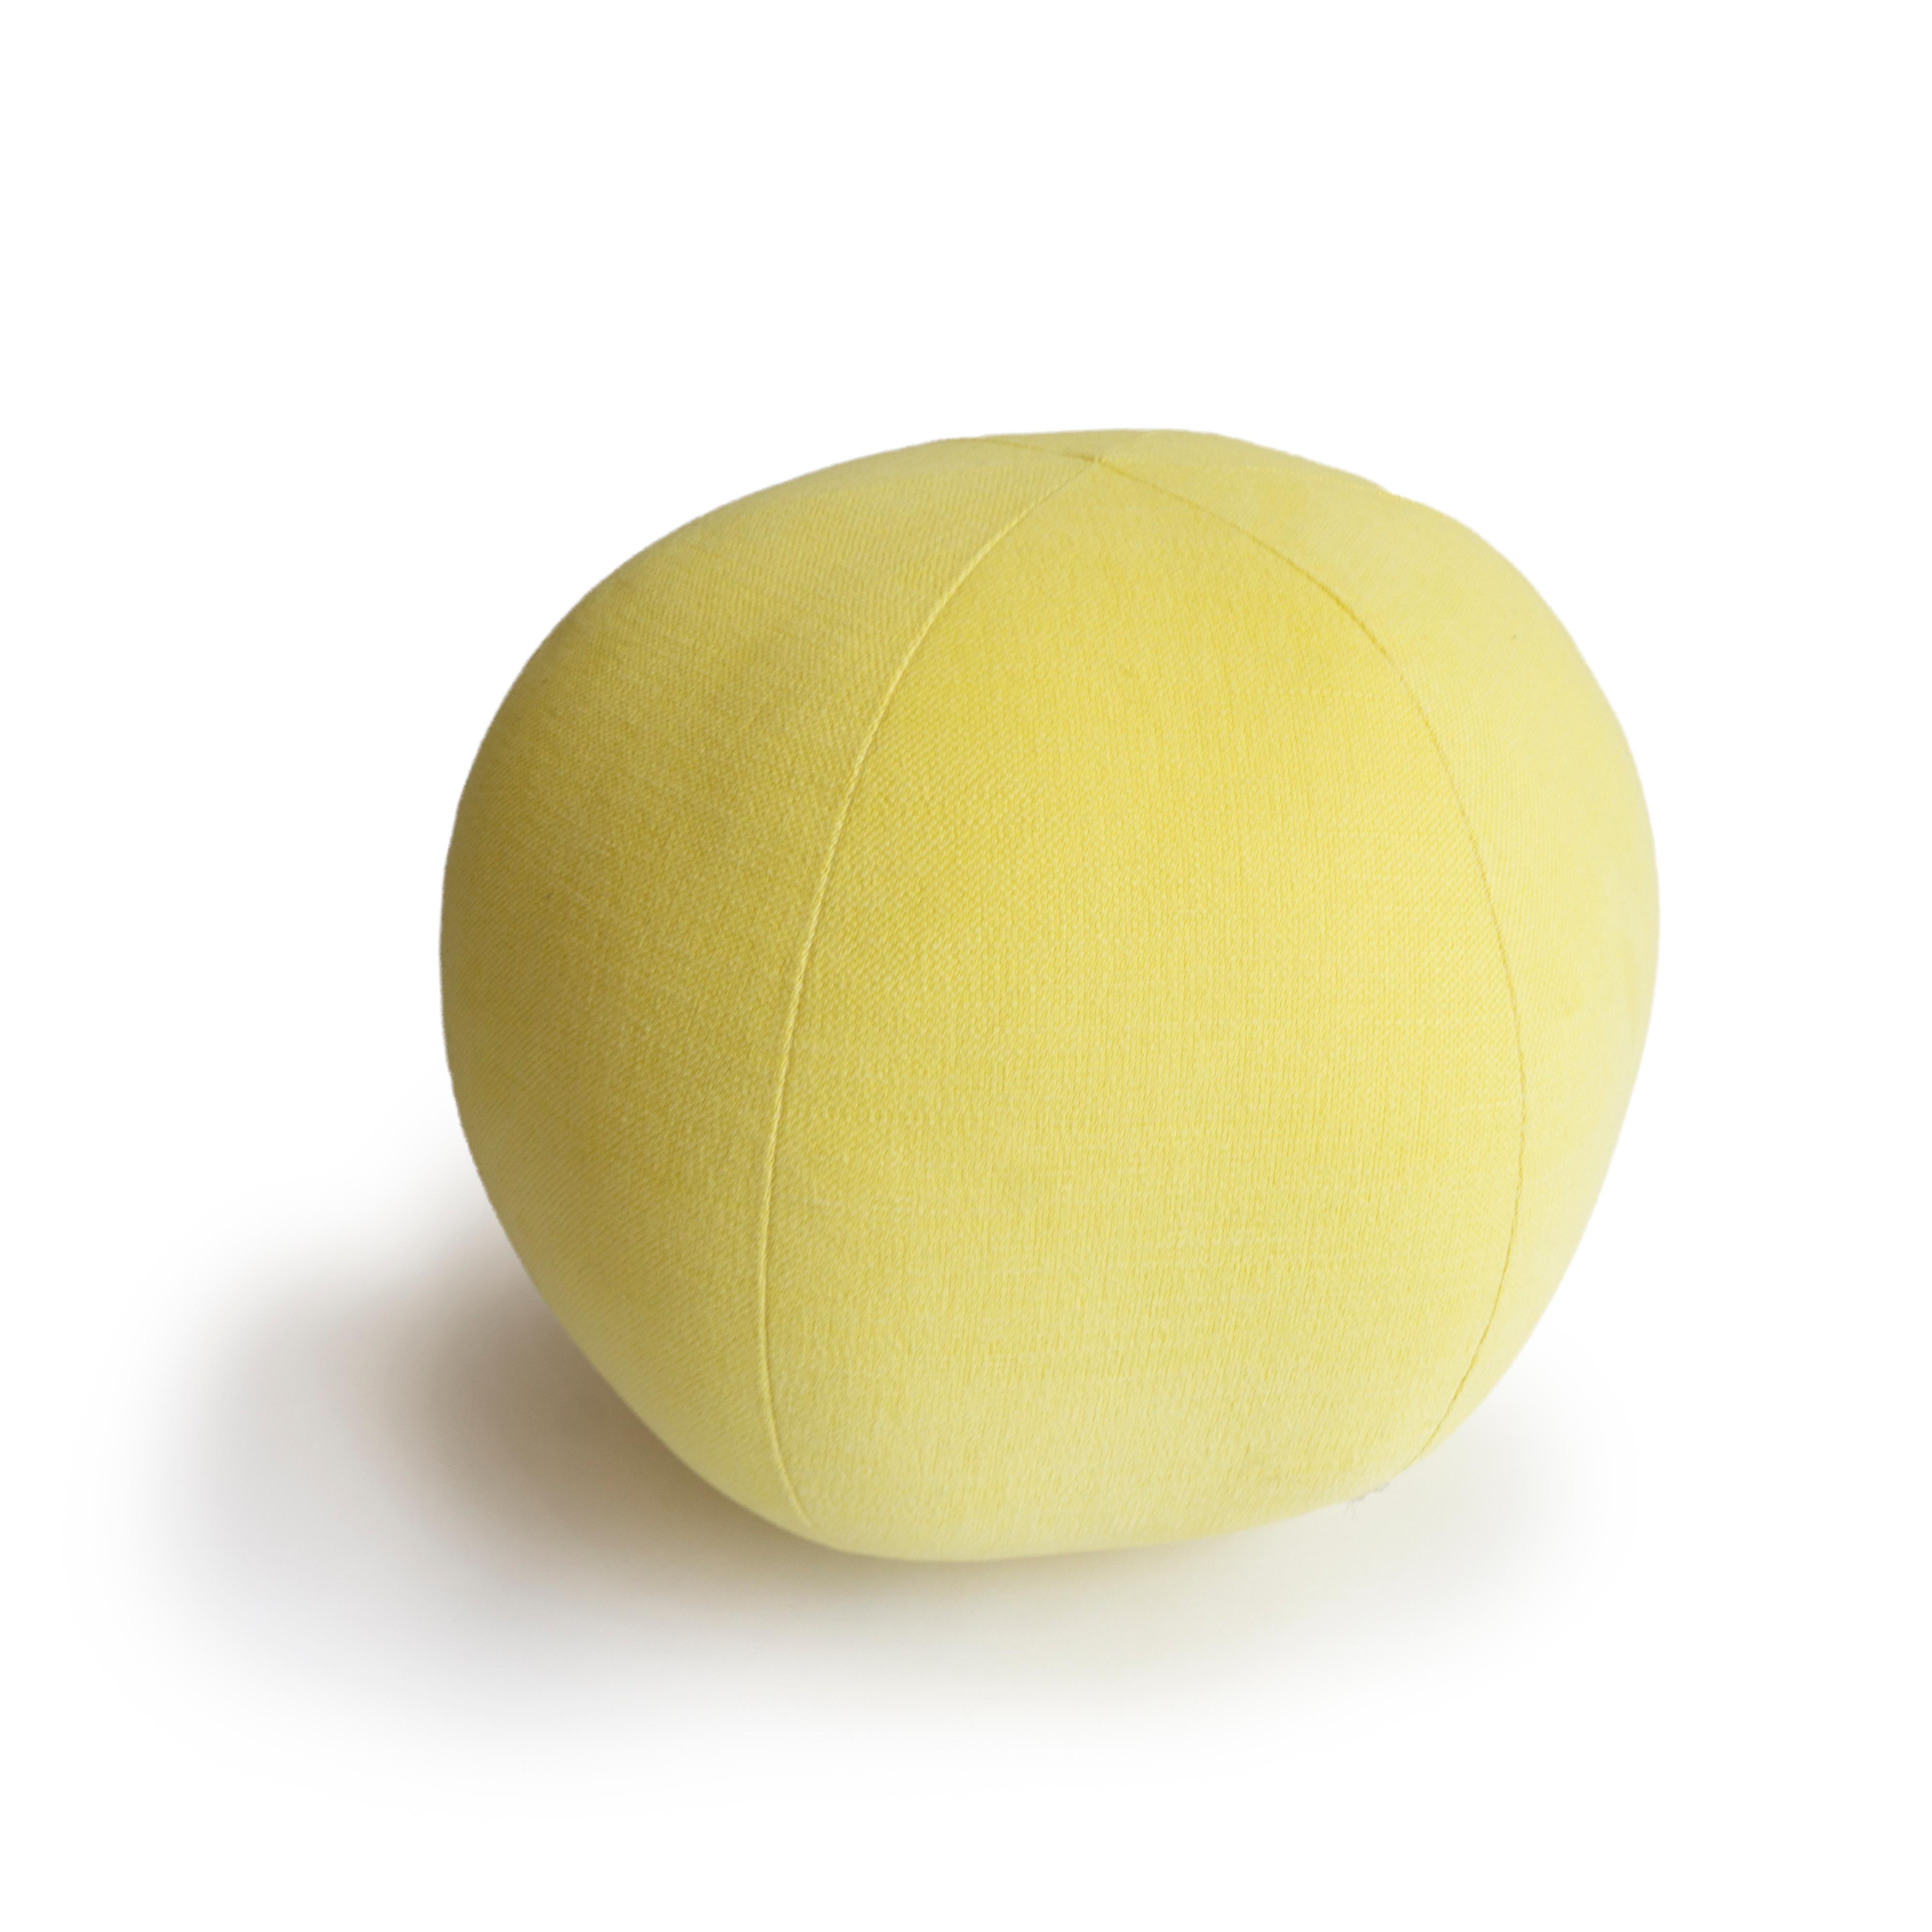 This hand sewn round ball throw pillow was handmade in a yellow cotton fabric. All pillows are made at our studio in Norwalk, Connecticut. 
Made to Order.

Measurements: 9